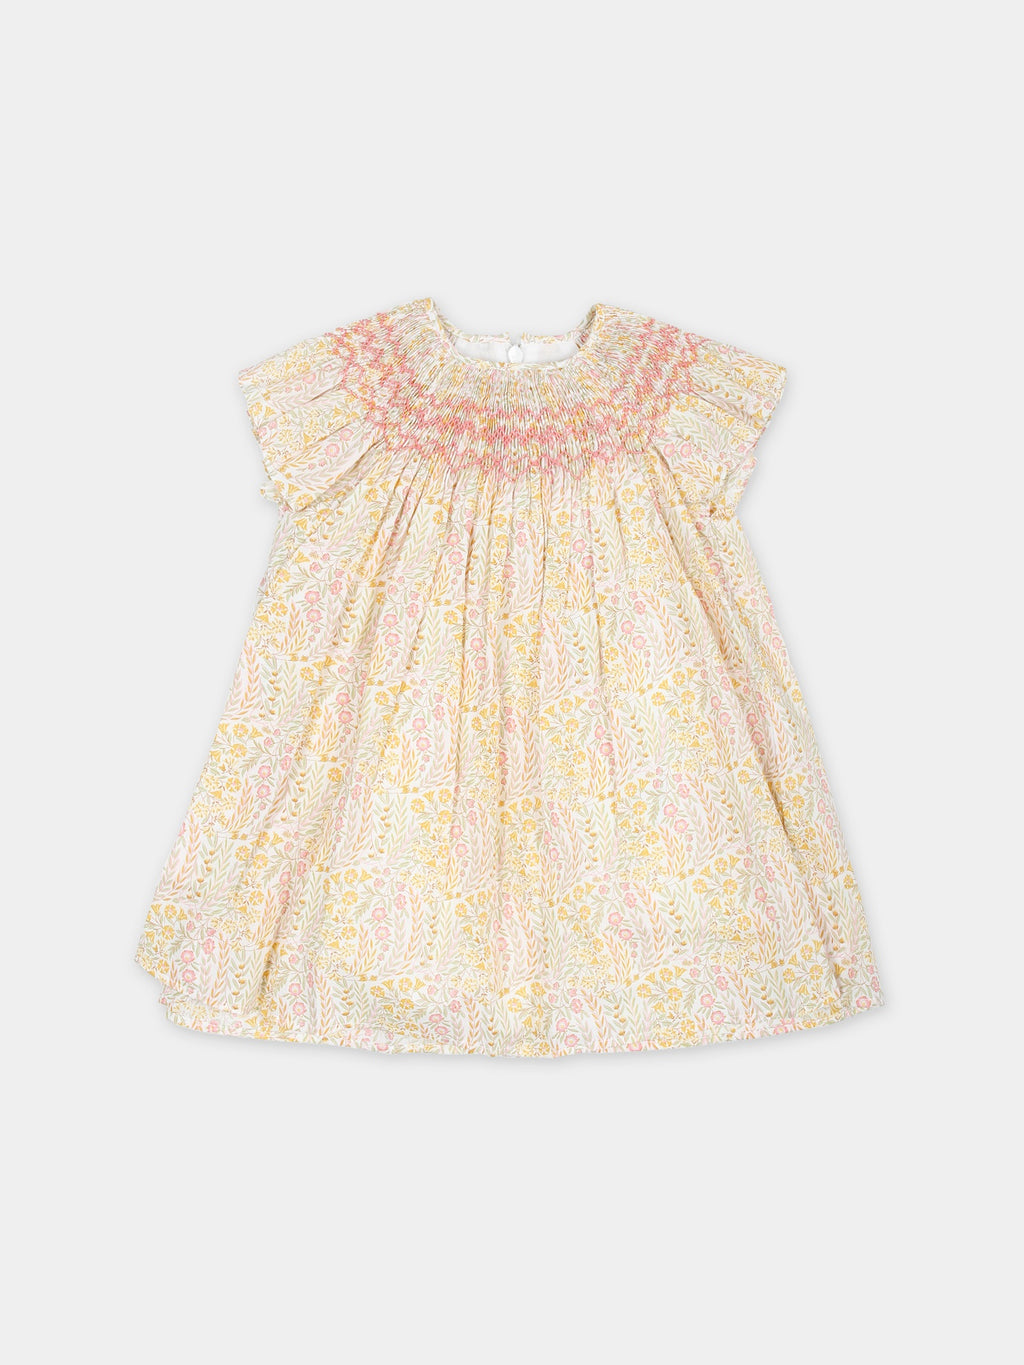 Ivory casual dress for baby girl with Liberty fabric